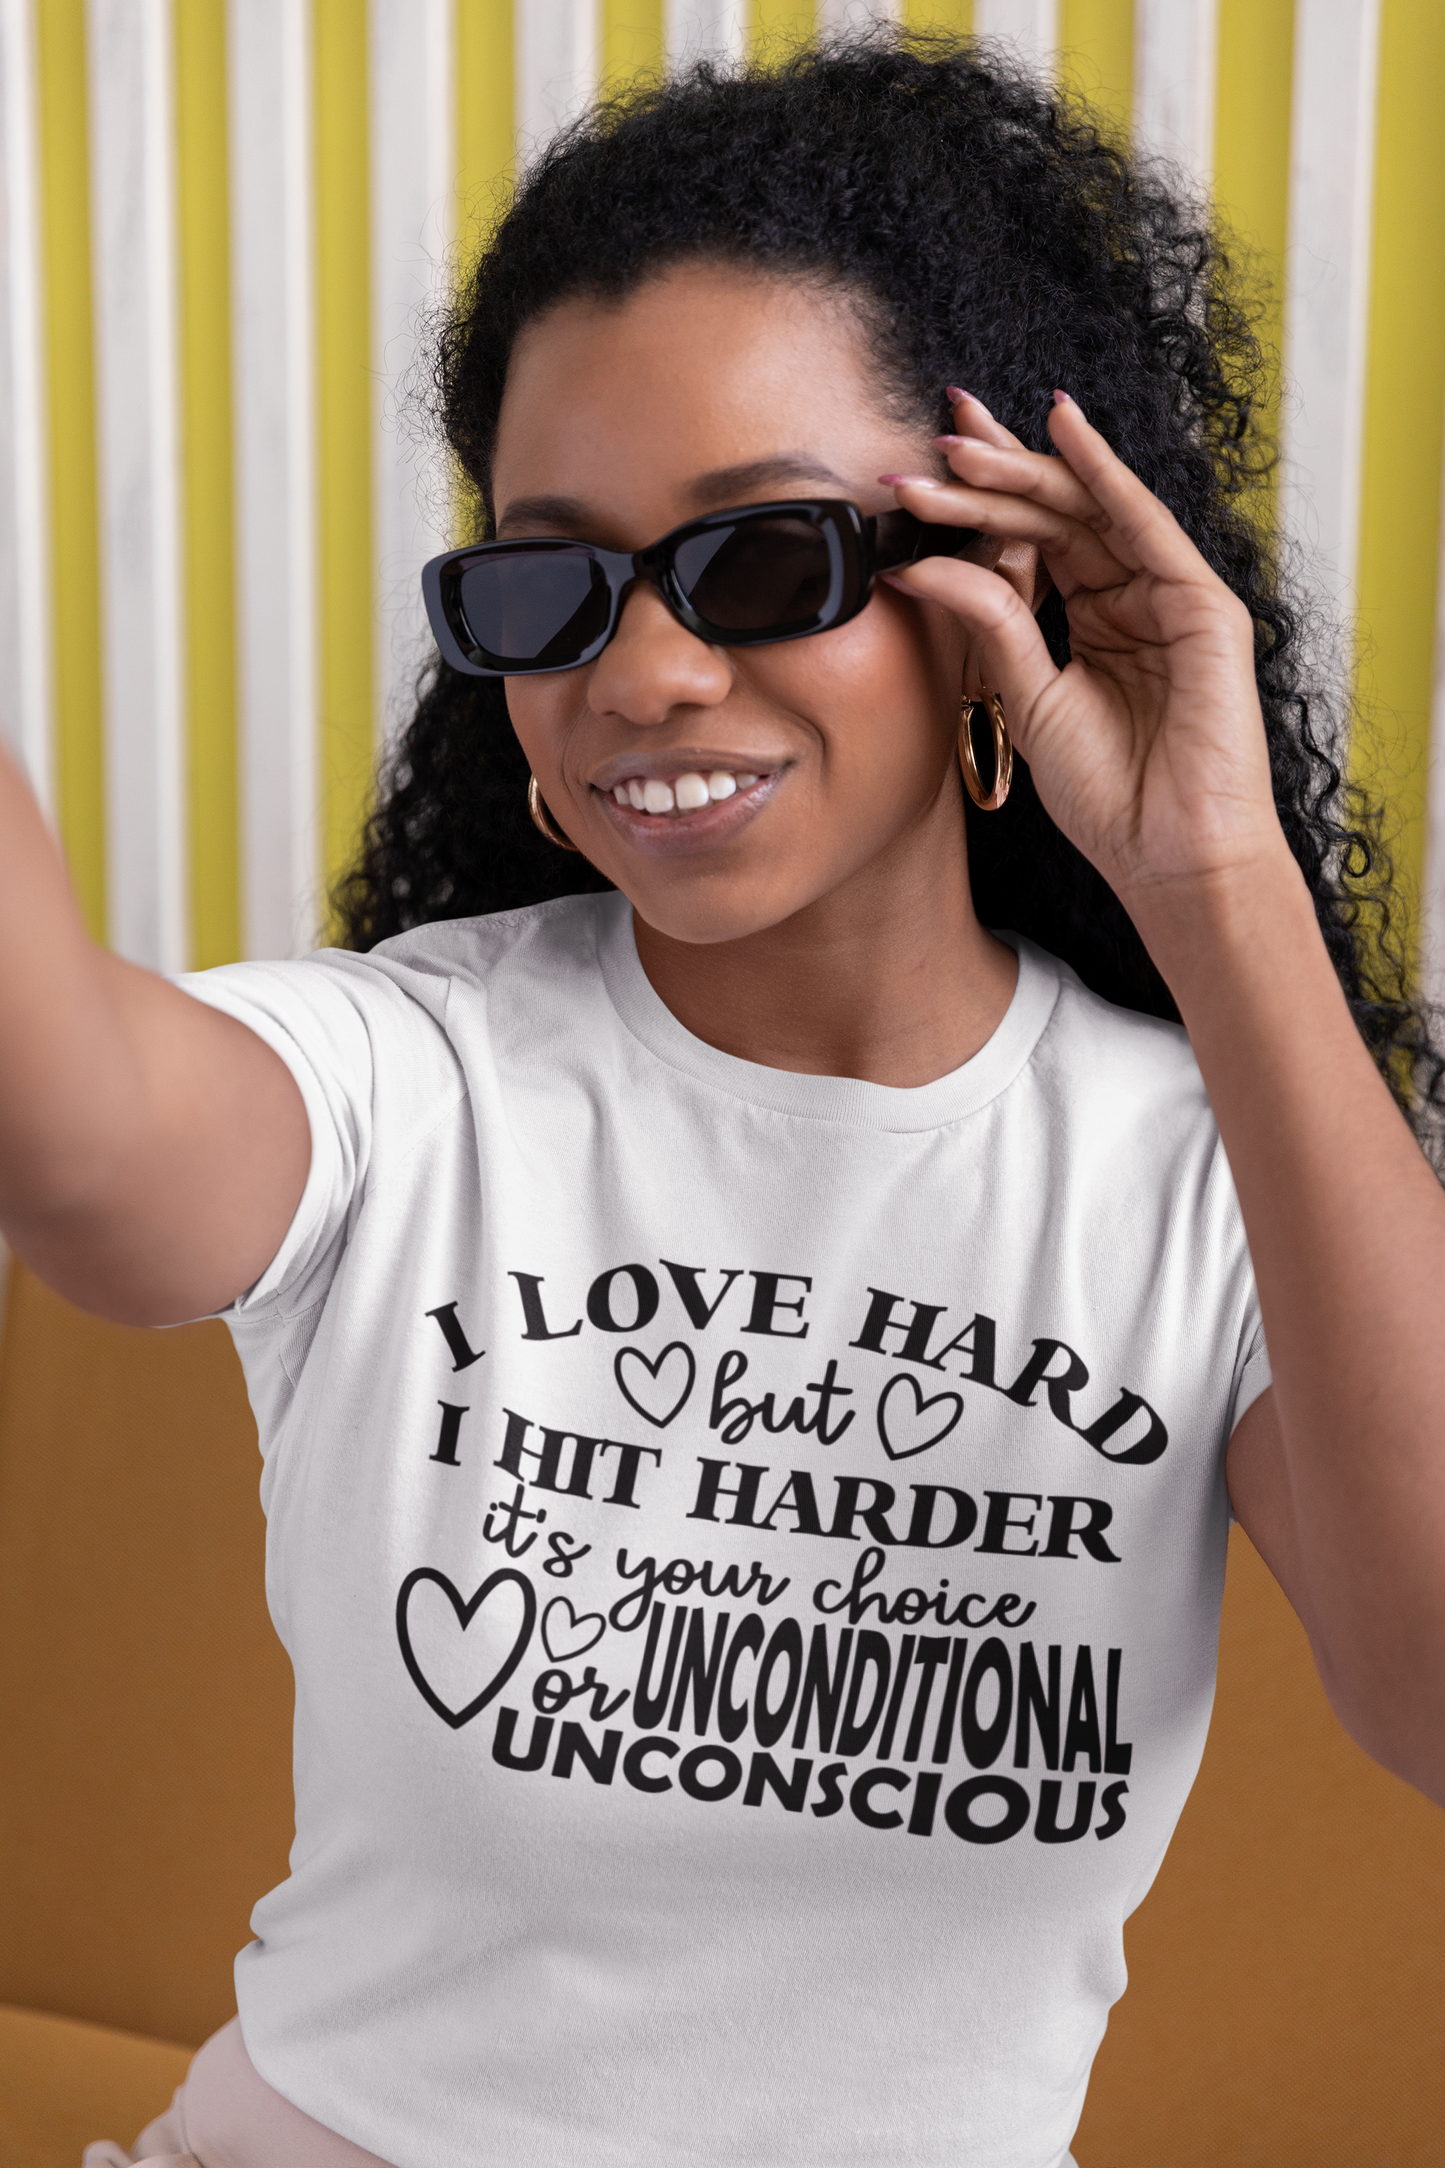 I Love Hard But I Hit Harder…It’s Your Choice UNCONDITIONAL Or UNCONSCIOUS T-shirt